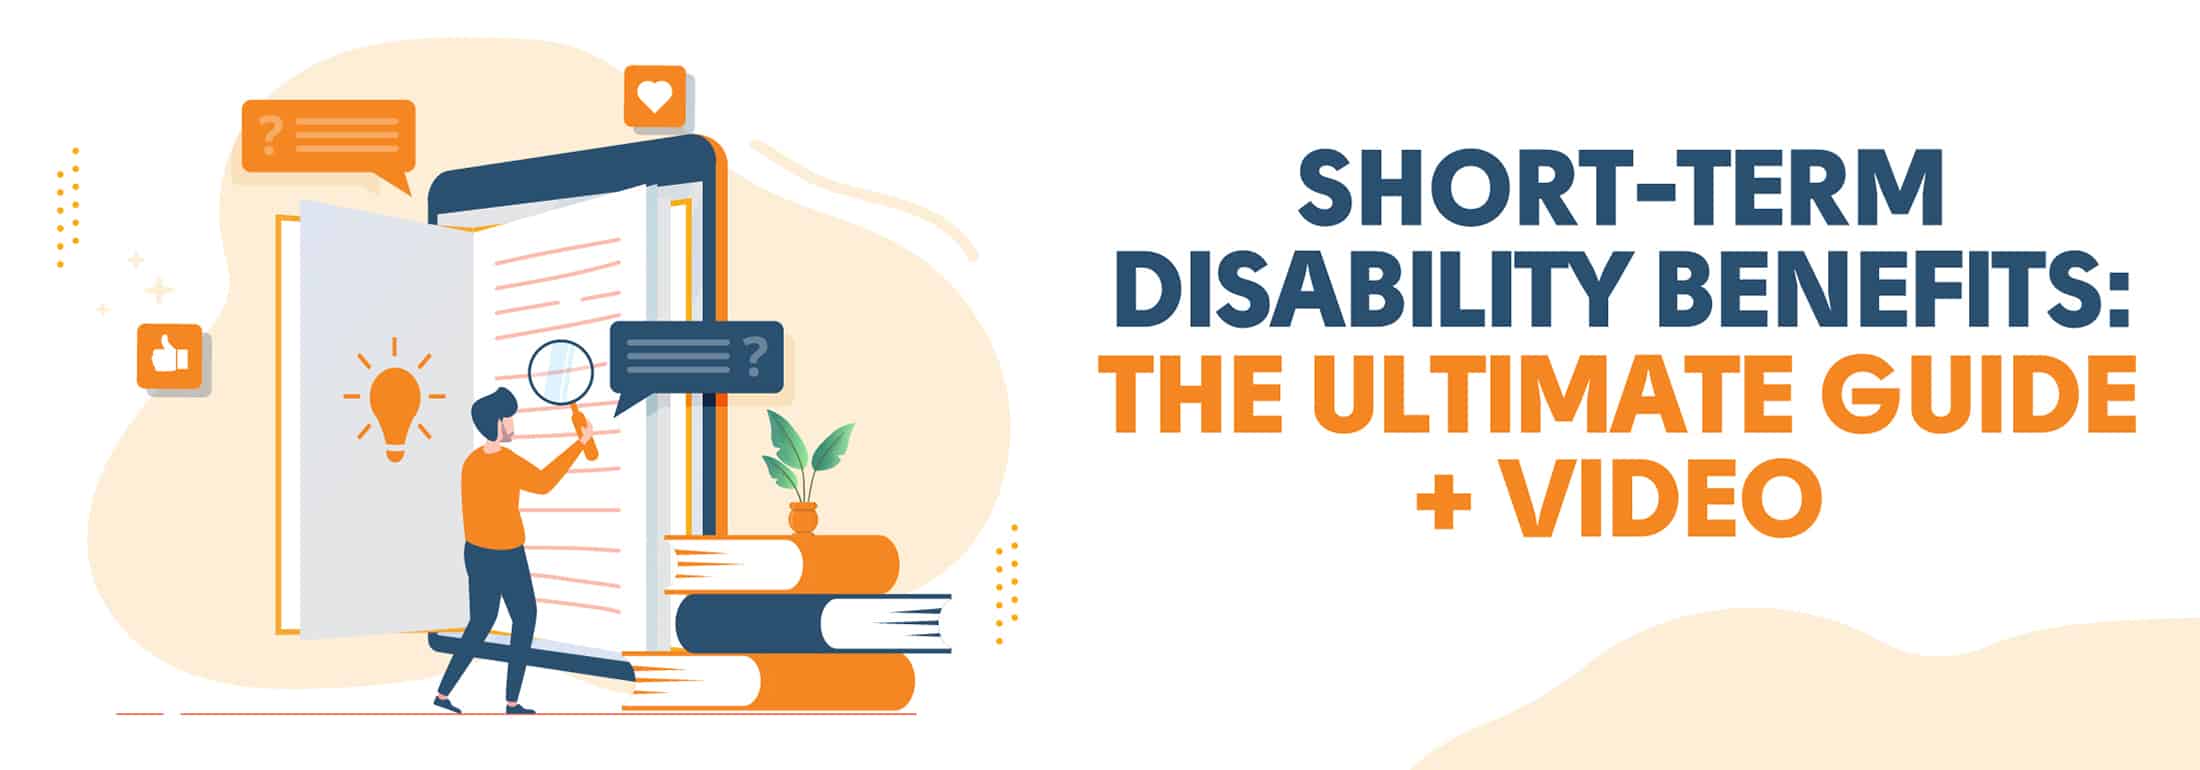 Ultimate Guide to Shortterm Disability Benefits [+Video] Resolute Legal